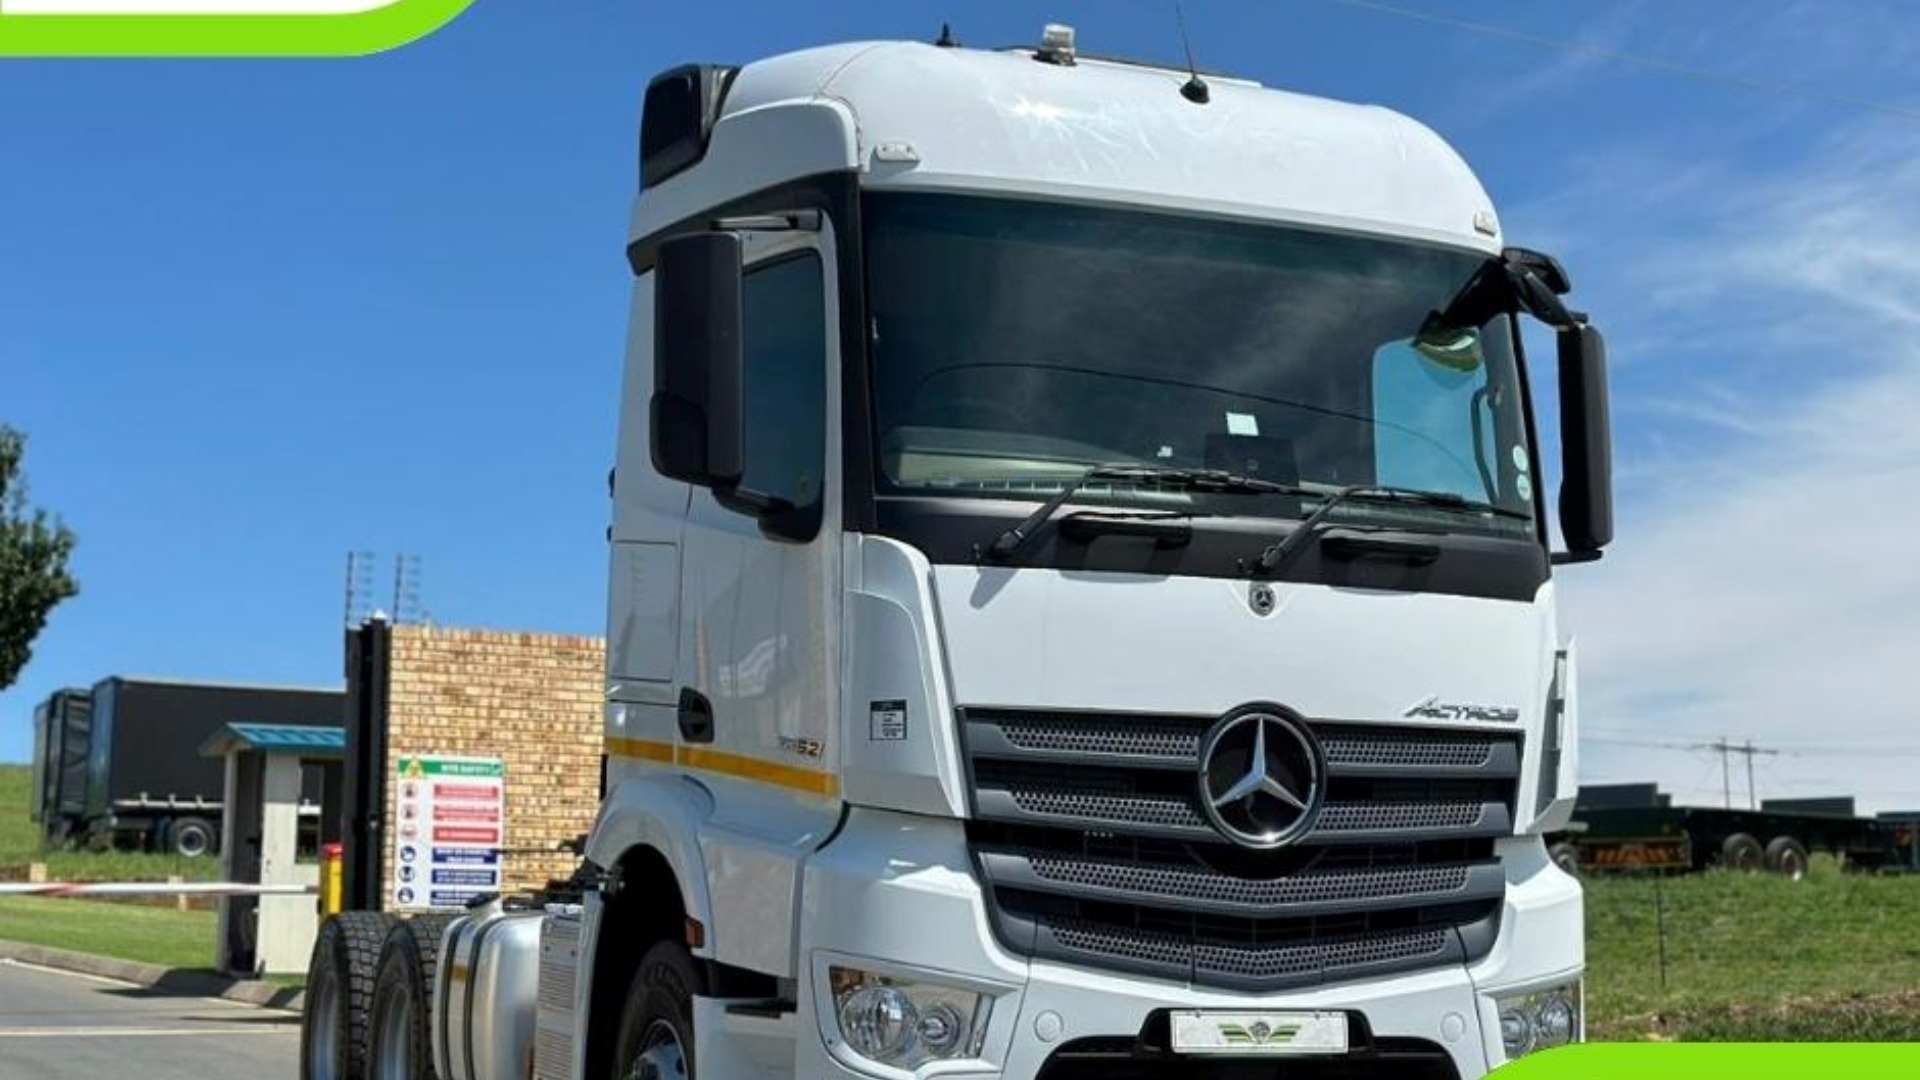 Mercedes Benz Truck tractors 2023 Mercedes Benz Actros 2652 2023 for sale by Truck and Plant Connection | Truck & Trailer Marketplace